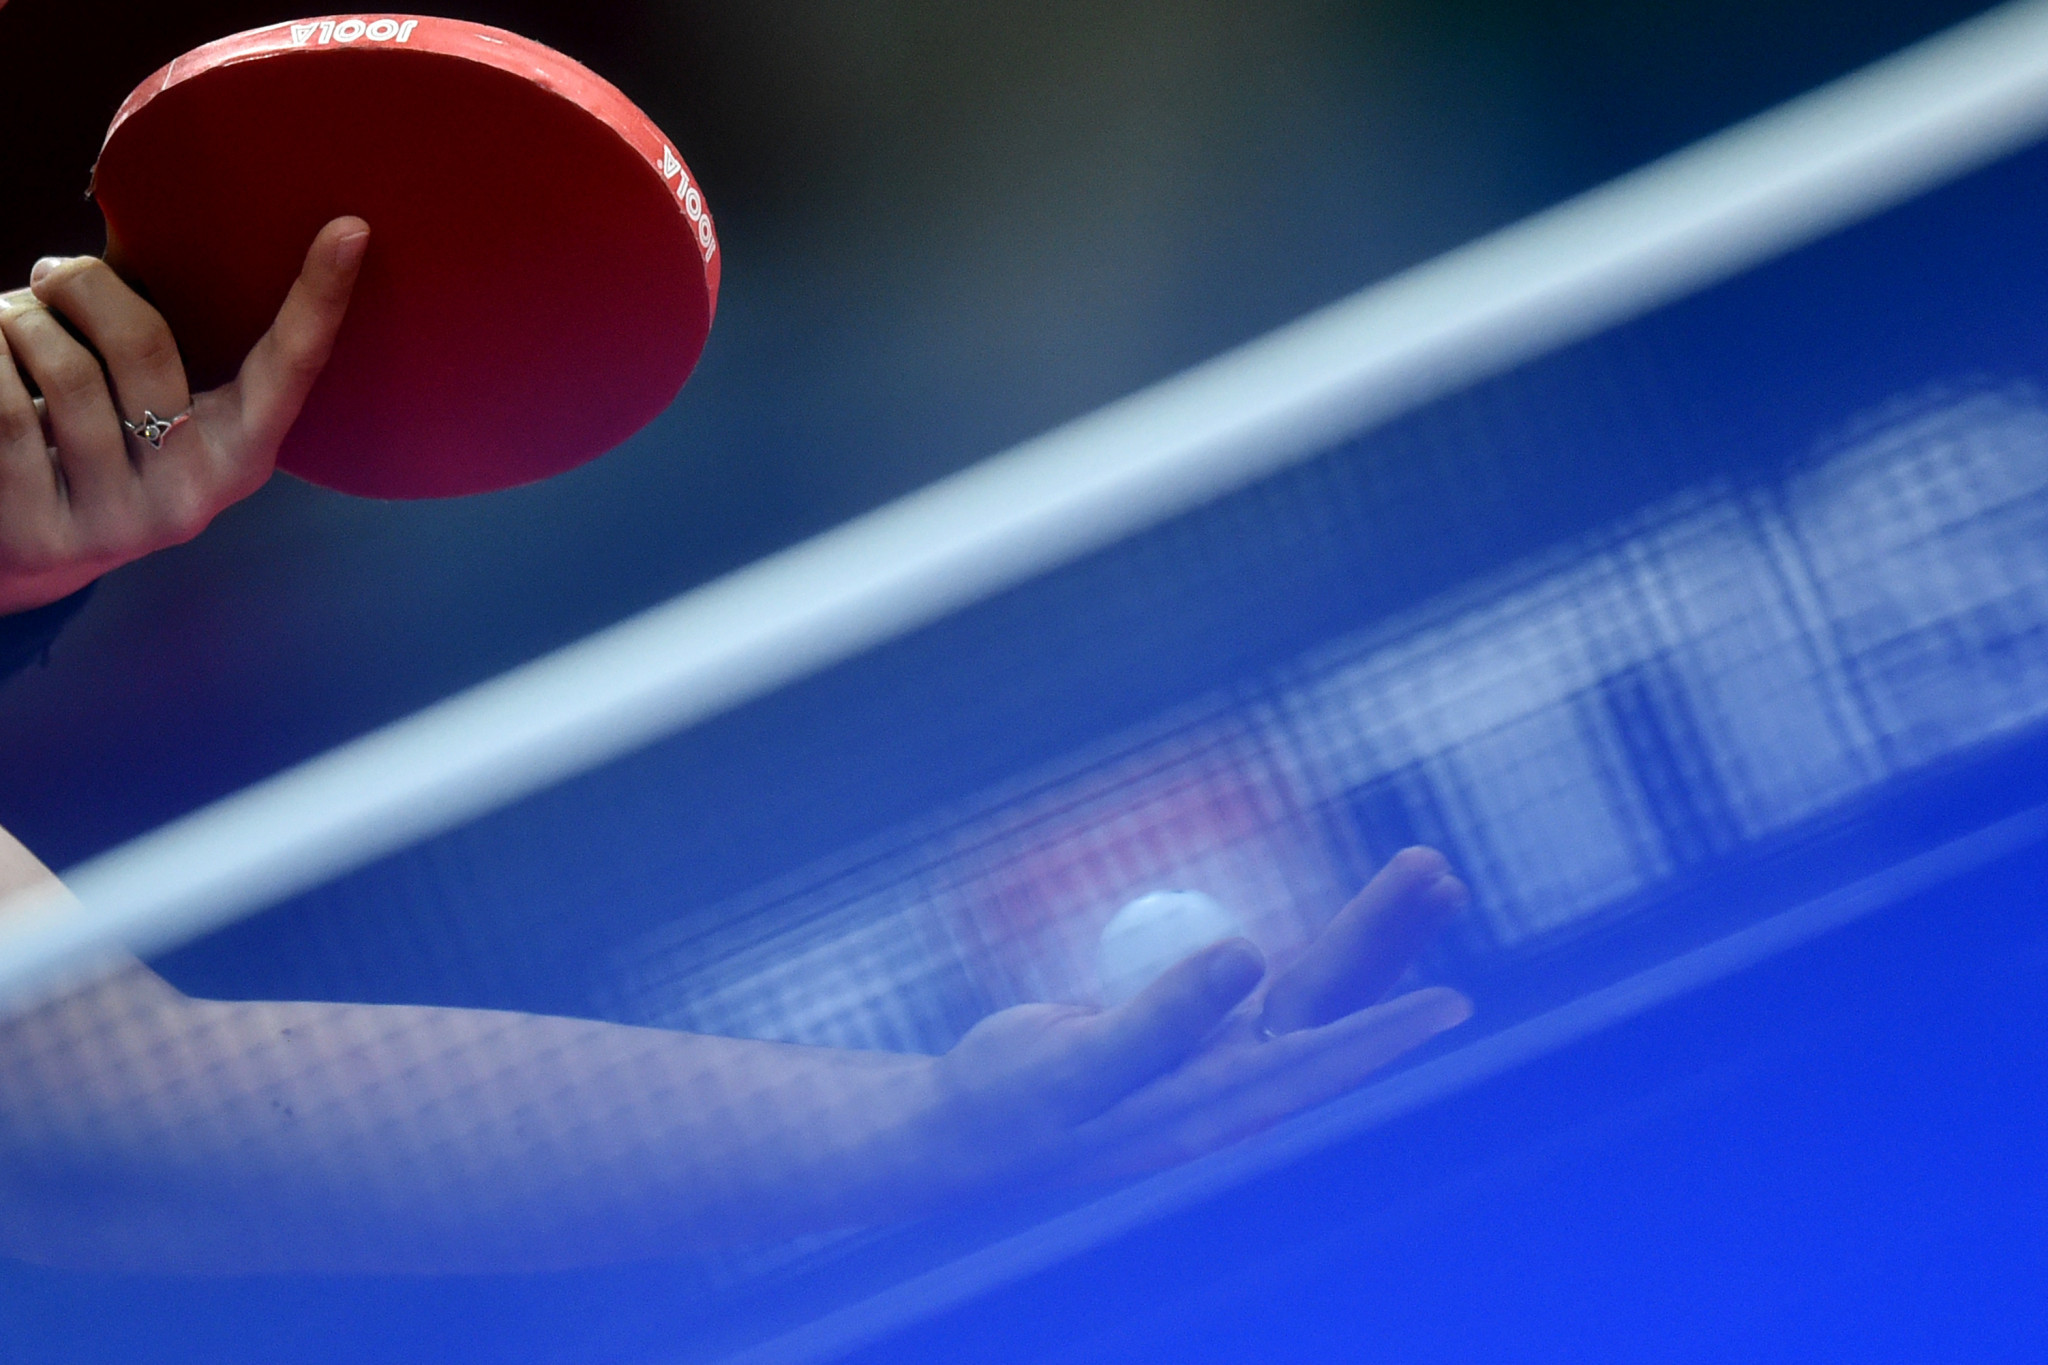 Chengdu 2022 World Team Table Tennis Championships to follow closed-loop management system similar to Beijing 2022